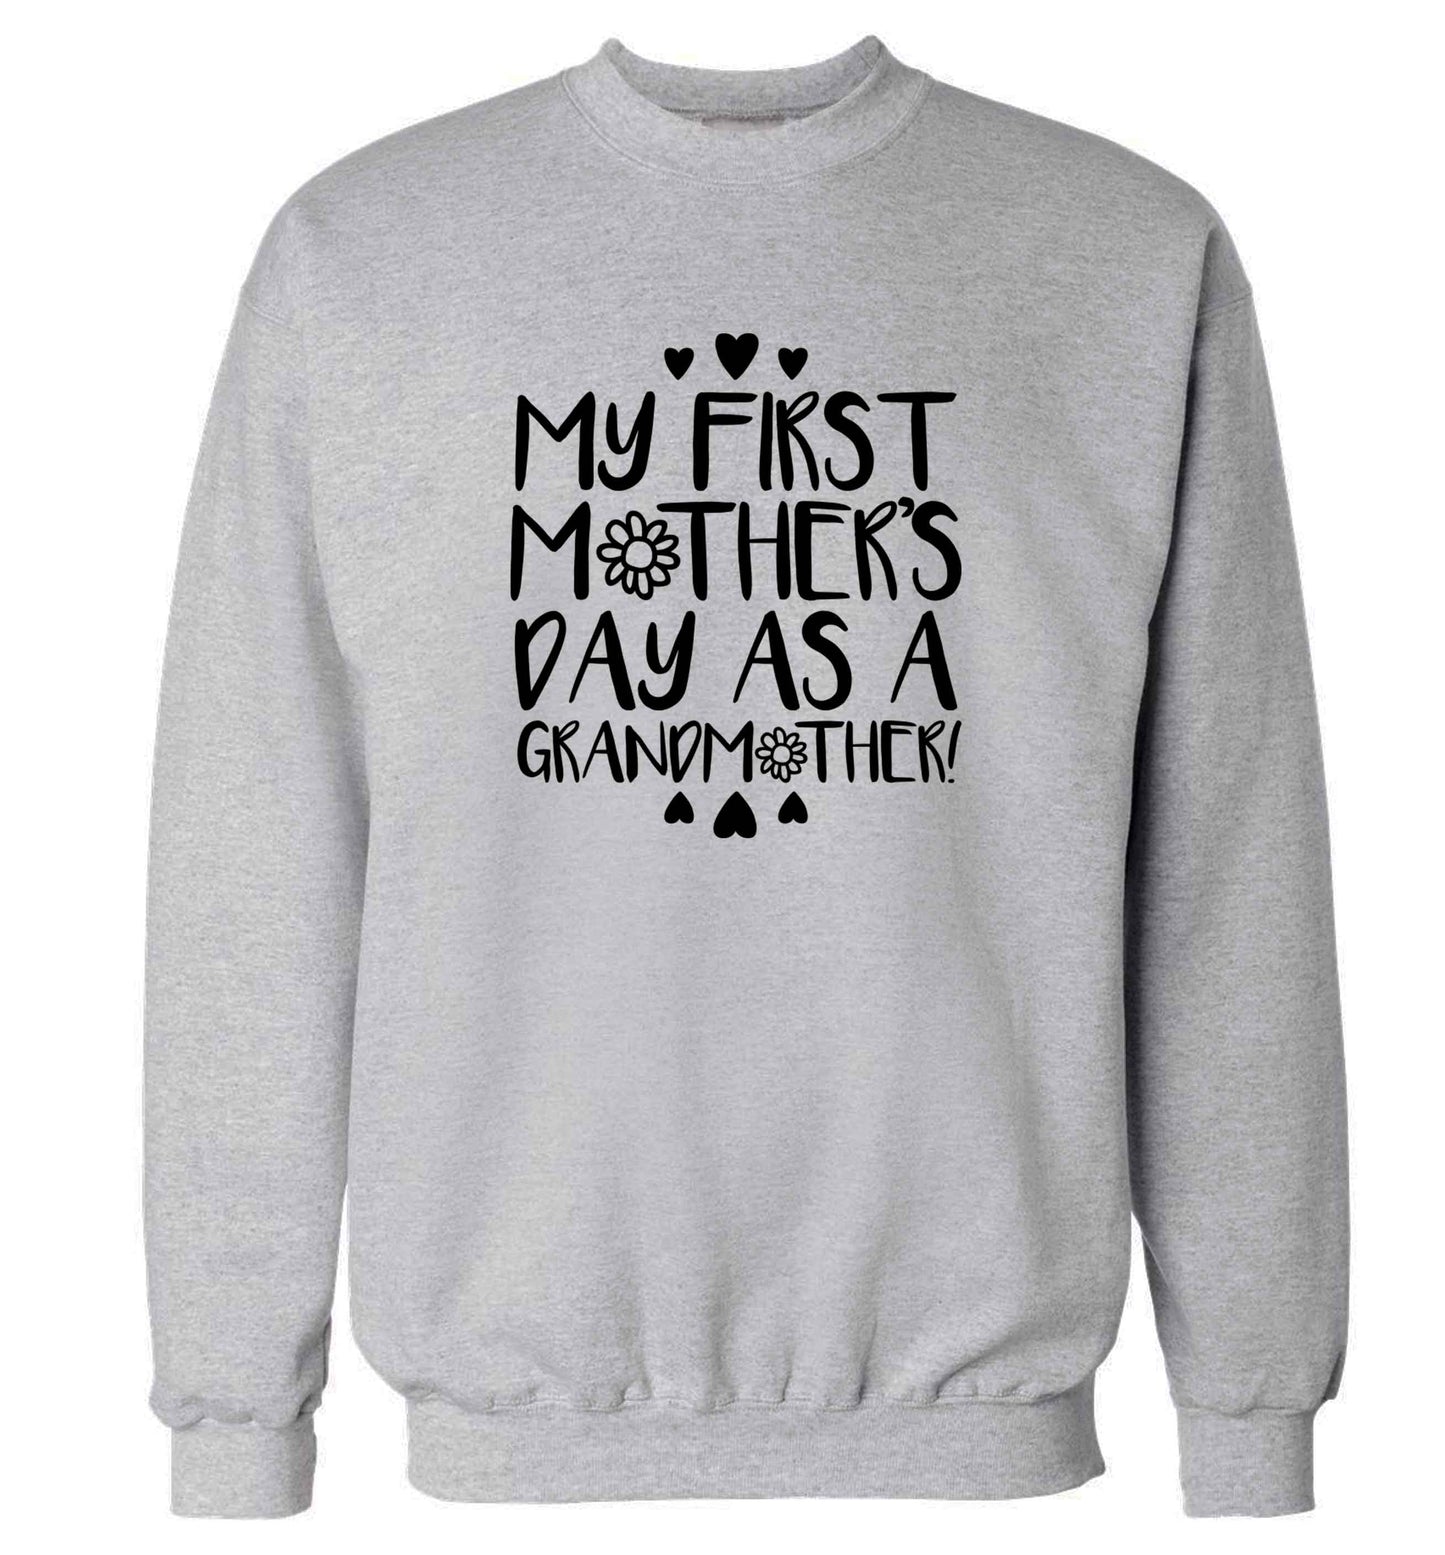 It's my first mother's day as a grandmother adult's unisex grey sweater 2XL